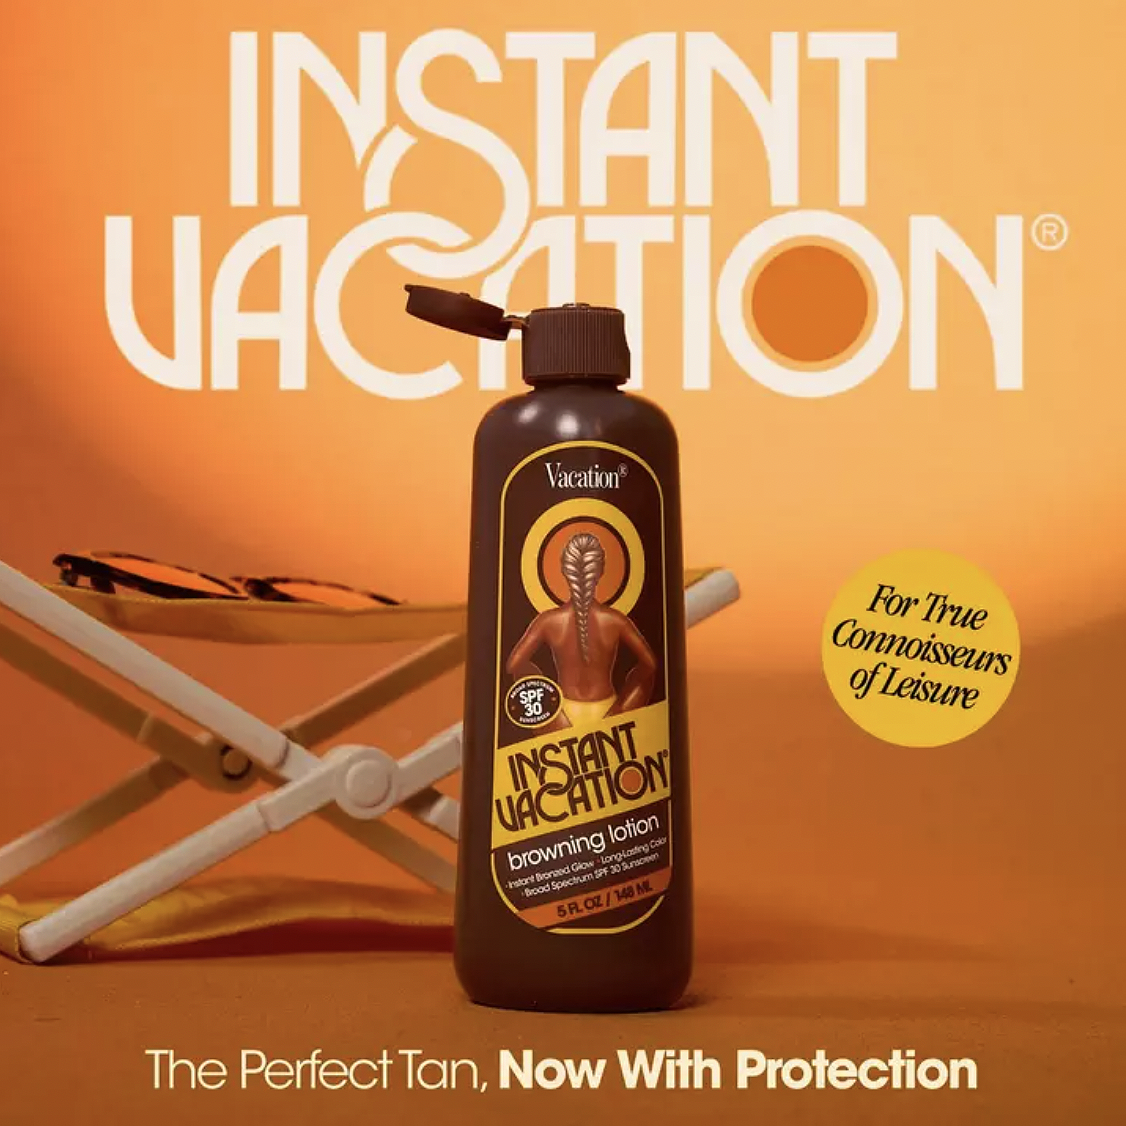 Instant Vacation Browning Lotion SPF30 Body Sunscreen